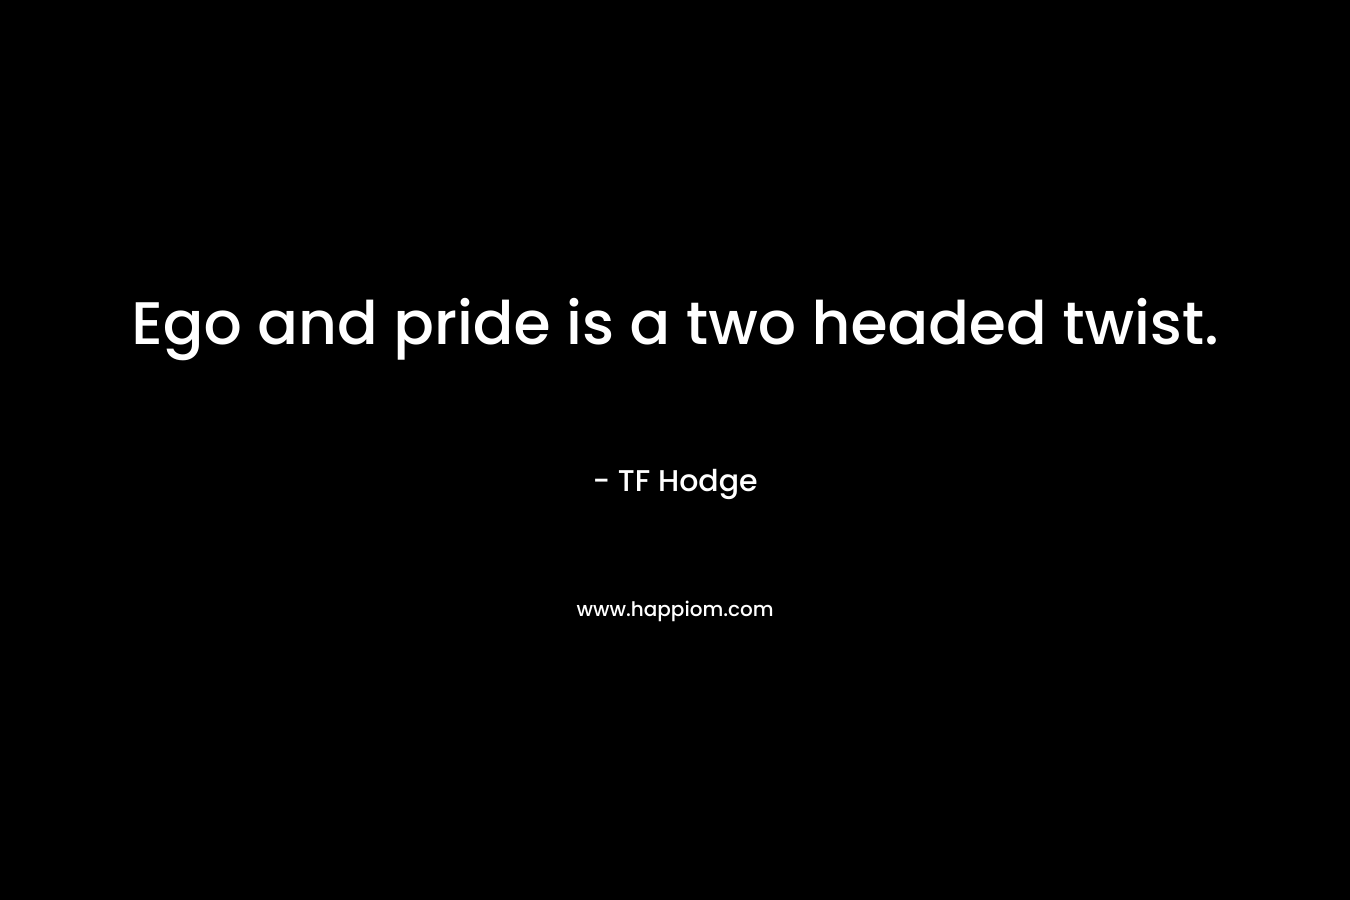 Ego and pride is a two headed twist.